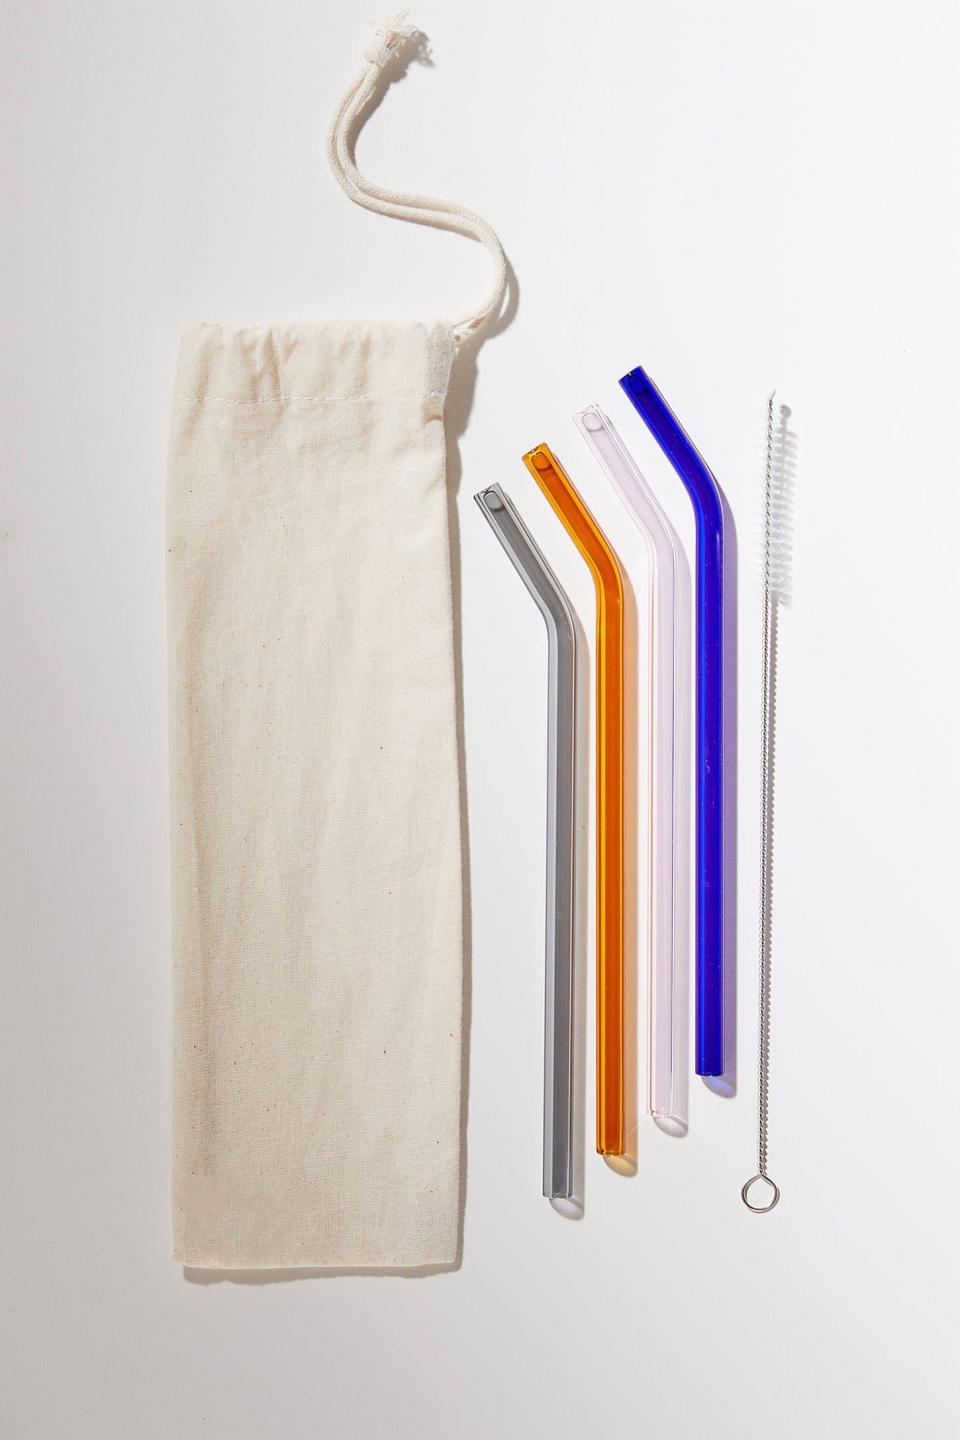 6) Urban Outfitters Glass Straws, 4-Pack